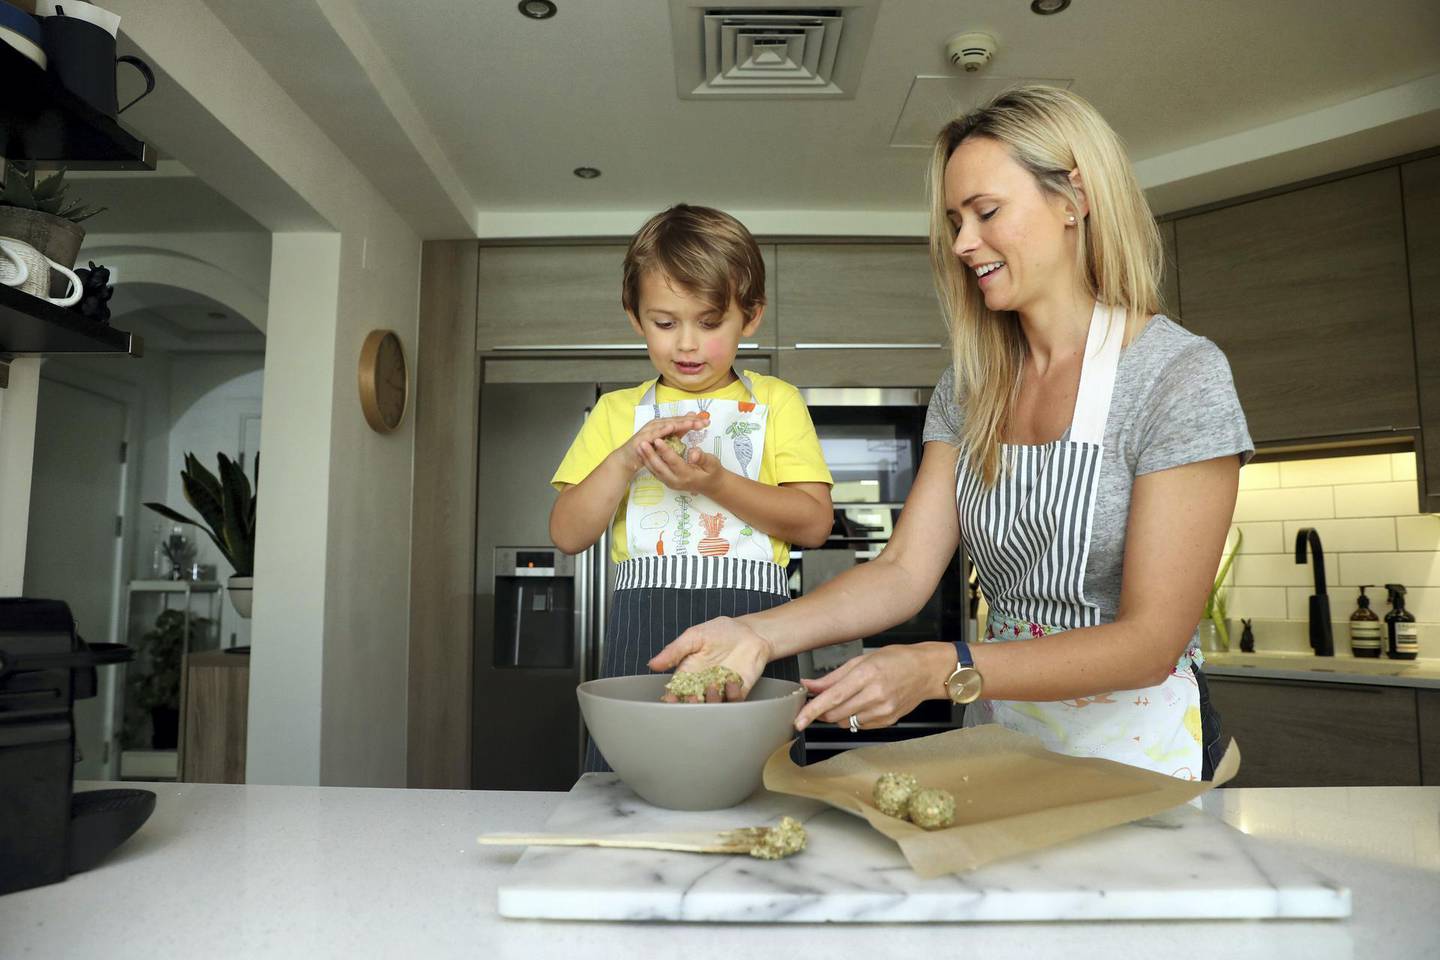 Dubai, United Arab Emirates - October 13, 2018: Gemma McQueen is a mum who uses organic fruit and veg wherever possible to cook for her son Arlo, 4 - and has put so much effort into doing so she has now created a recipe book of healthy food. Saturday, October 13th, 2018 at The Palm, Dubai. Chris Whiteoak / The National